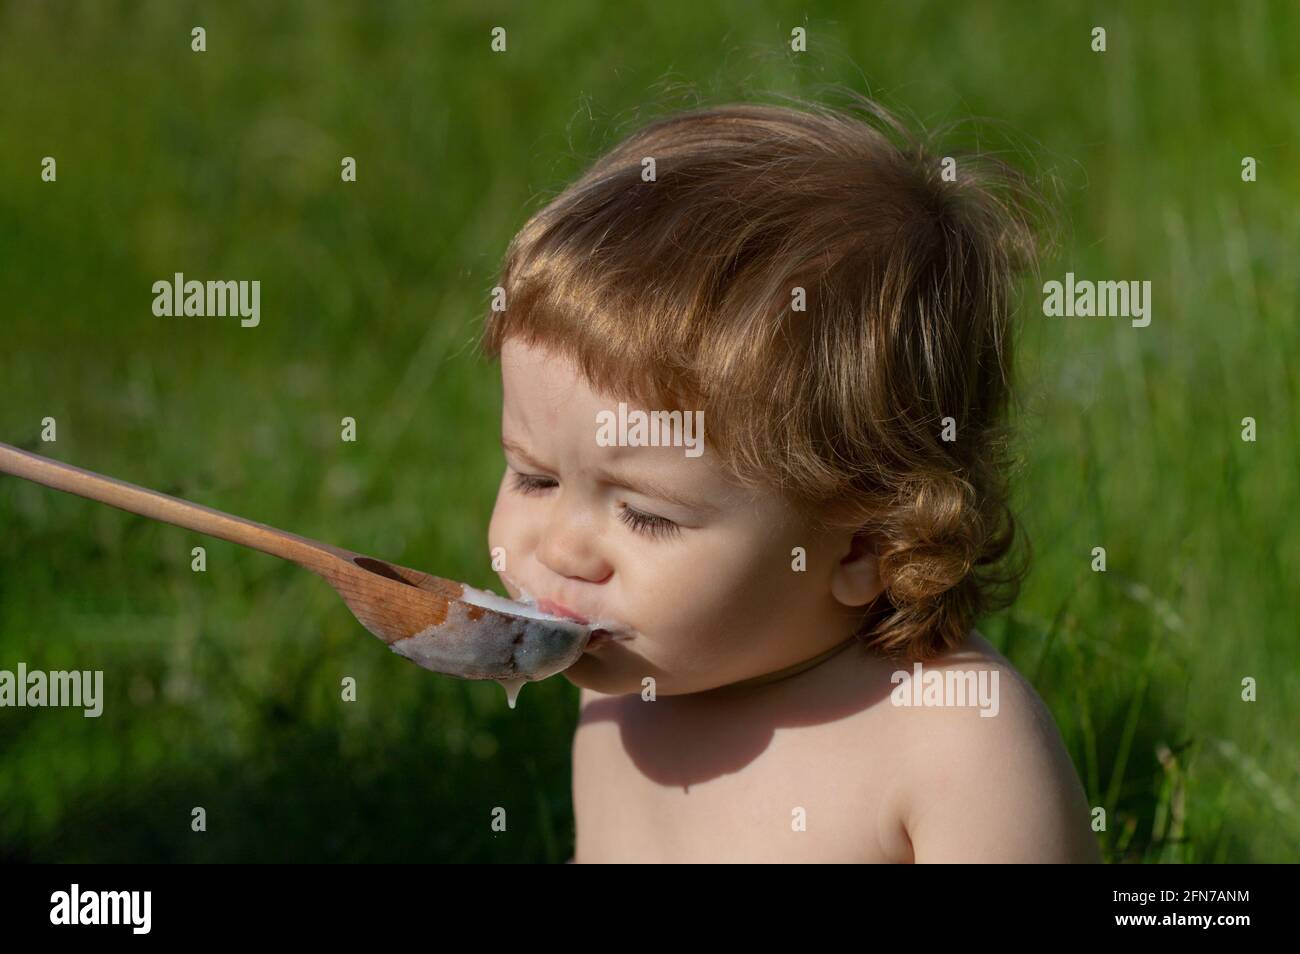 Cute toddler baby eating healthy food. Feeding with spoon. Funny child face. Stock Photo